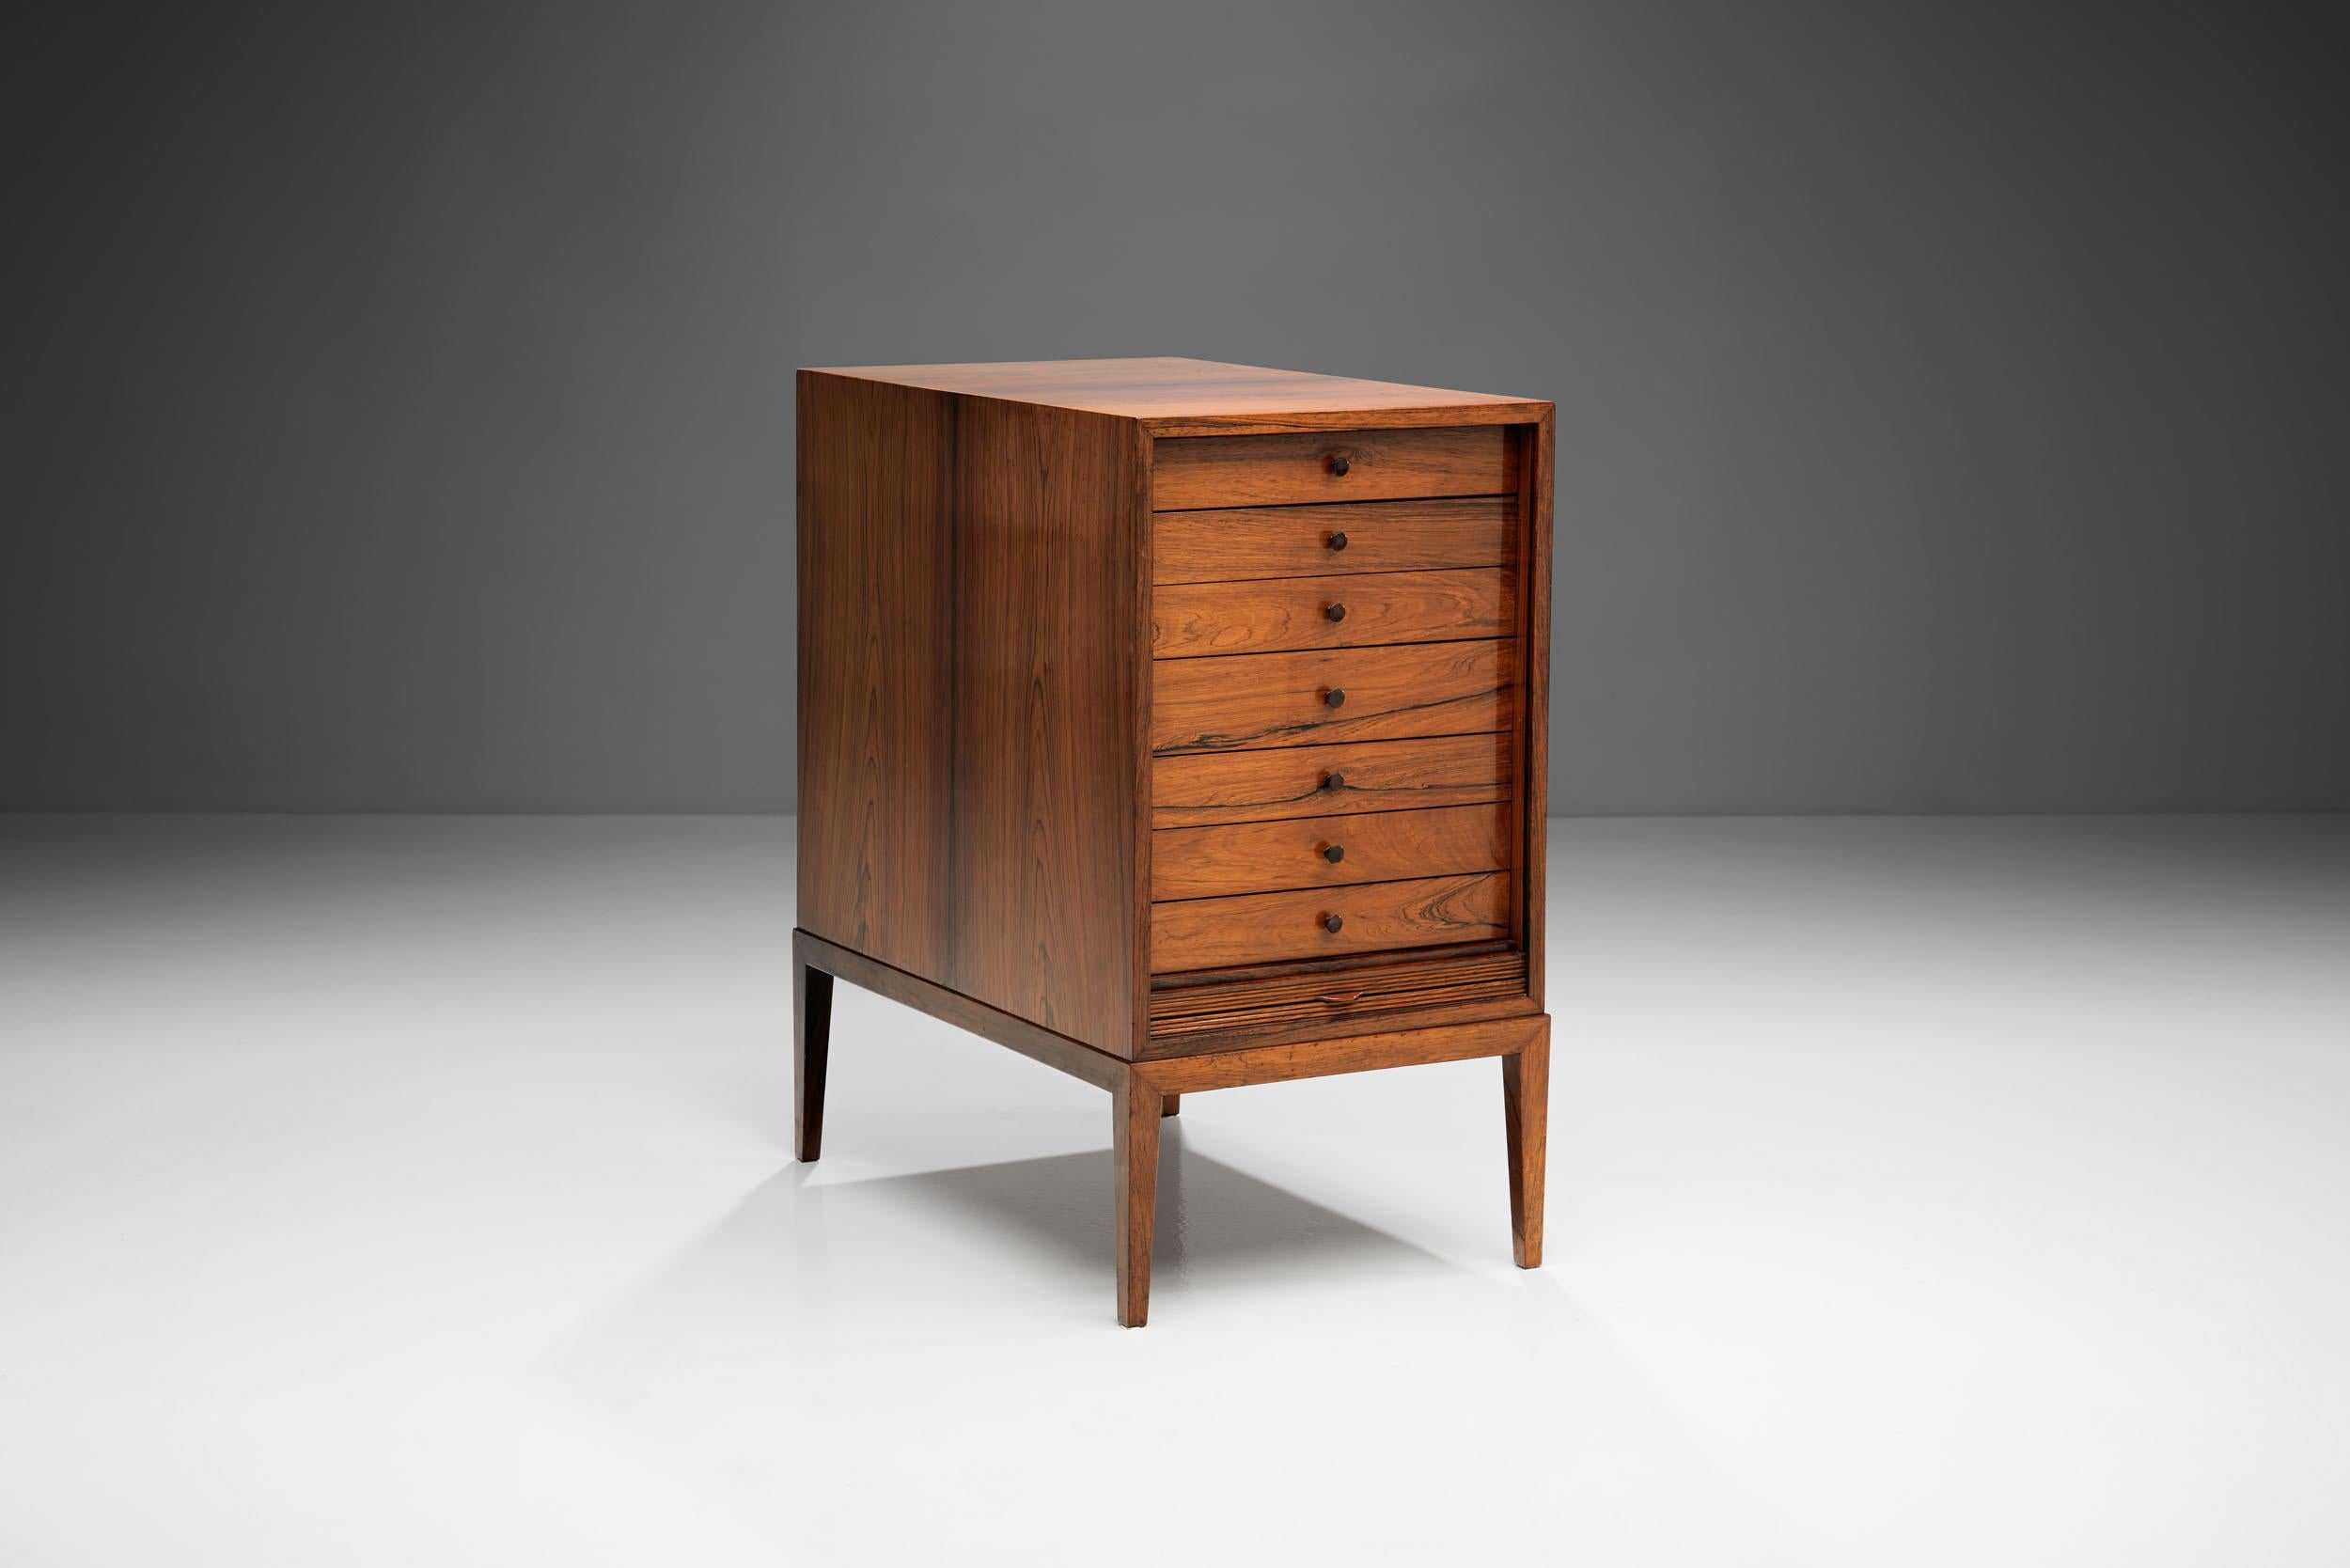 Classic design with expert craftsmanship. This how this cabinet and the Danish master cabinetmaker, Frits Henningsen could be best described. Unlike most cabinetmakers, Henningsen always designed his own furniture pieces, creating exclusively